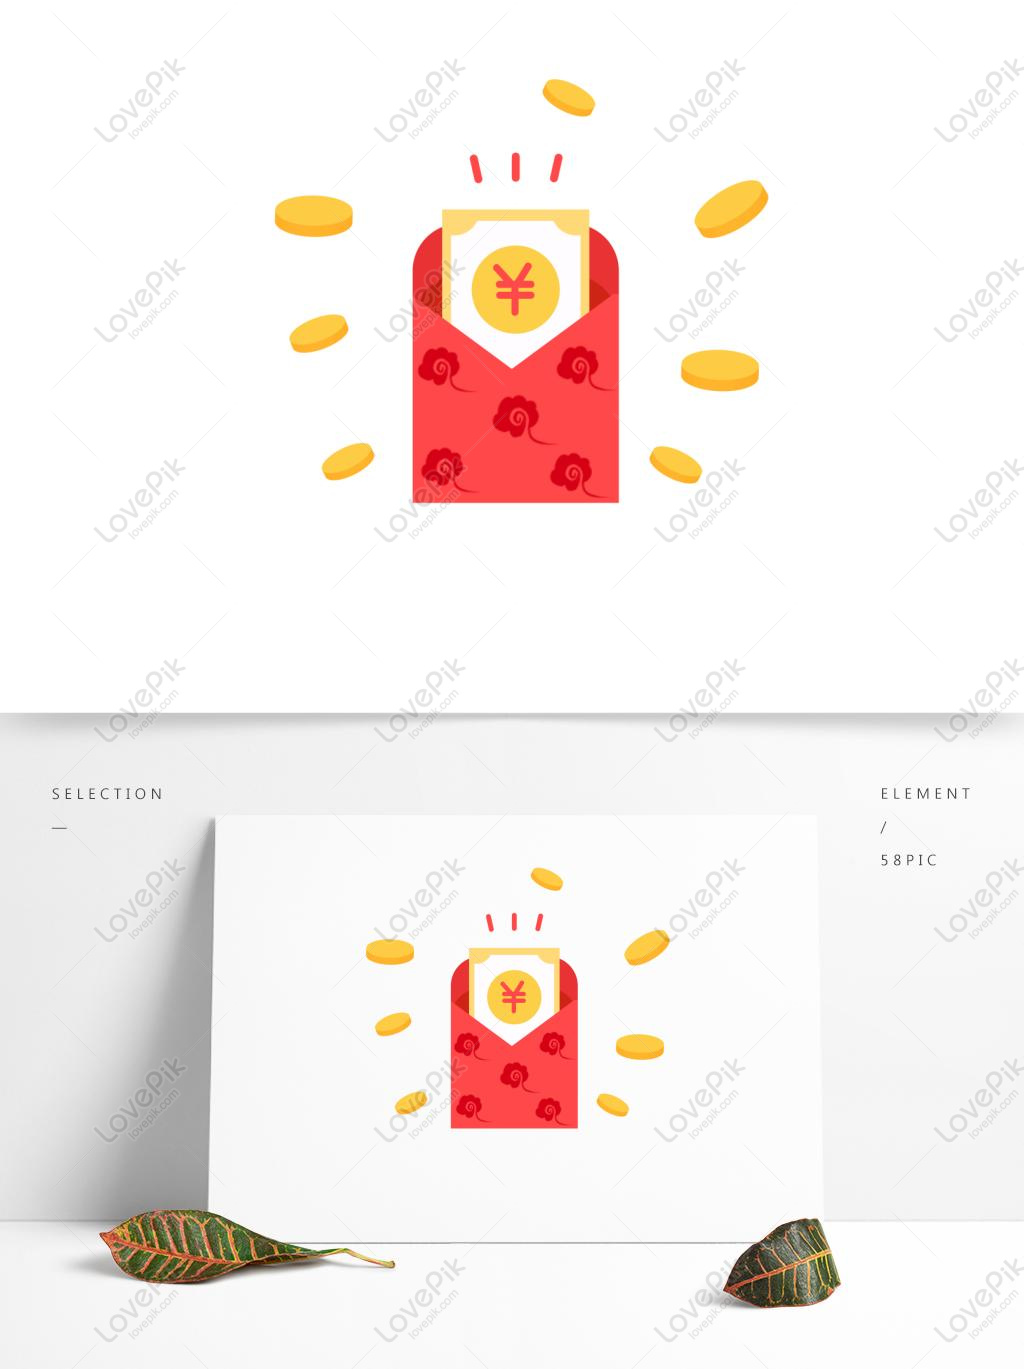 New Year Red Envelope Festive Gold Coin Red Cartoon Vector Commercial  Elements PNG Images